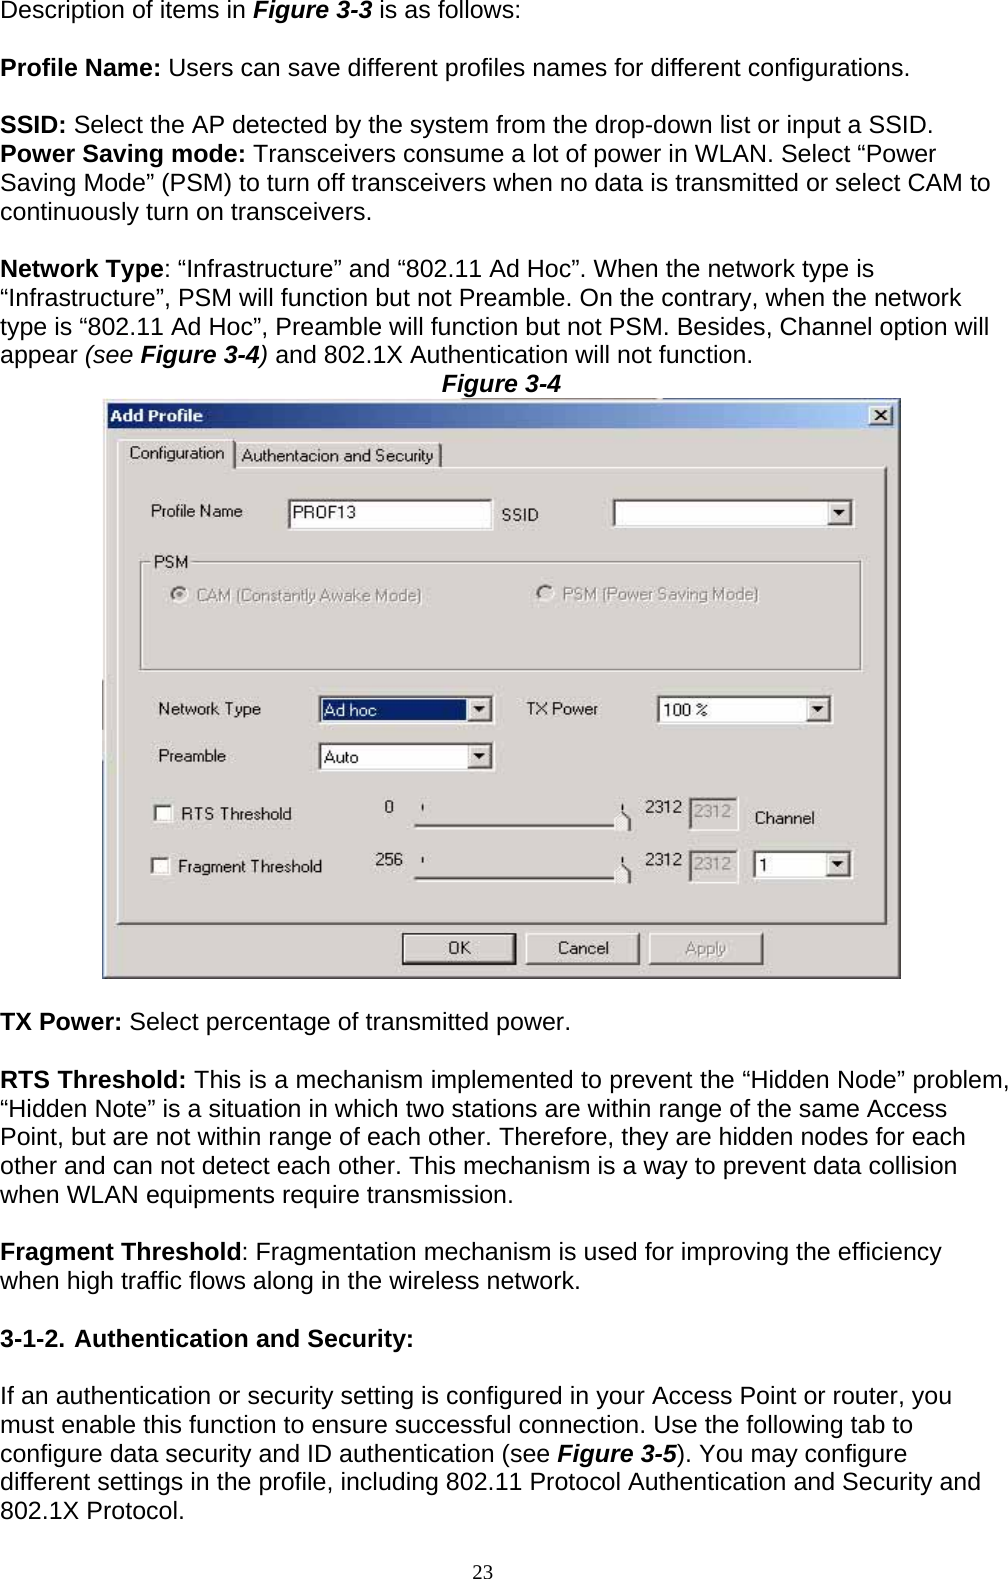 Description of items in Figure 3-3 is as follows:  Profile Name: Users can save different profiles names for different configurations.  SSID: Select the AP detected by the system from the drop-down list or input a SSID. Power Saving mode: Transceivers consume a lot of power in WLAN. Select “Power Saving Mode” (PSM) to turn off transceivers when no data is transmitted or select CAM to continuously turn on transceivers.  Network Type: “Infrastructure” and “802.11 Ad Hoc”. When the network type is “Infrastructure”, PSM will function but not Preamble. On the contrary, when the network type is “802.11 Ad Hoc”, Preamble will function but not PSM. Besides, Channel option will appear (see Figure 3-4) and 802.1X Authentication will not function. Figure 3-4   TX Power: Select percentage of transmitted power.  RTS Threshold: This is a mechanism implemented to prevent the “Hidden Node” problem, “Hidden Note” is a situation in which two stations are within range of the same Access Point, but are not within range of each other. Therefore, they are hidden nodes for each other and can not detect each other. This mechanism is a way to prevent data collision when WLAN equipments require transmission.  Fragment Threshold: Fragmentation mechanism is used for improving the efficiency when high traffic flows along in the wireless network.  3-1-2. Authentication and Security:  If an authentication or security setting is configured in your Access Point or router, you must enable this function to ensure successful connection. Use the following tab to configure data security and ID authentication (see Figure 3-5). You may configure different settings in the profile, including 802.11 Protocol Authentication and Security and 802.1X Protocol. 23   